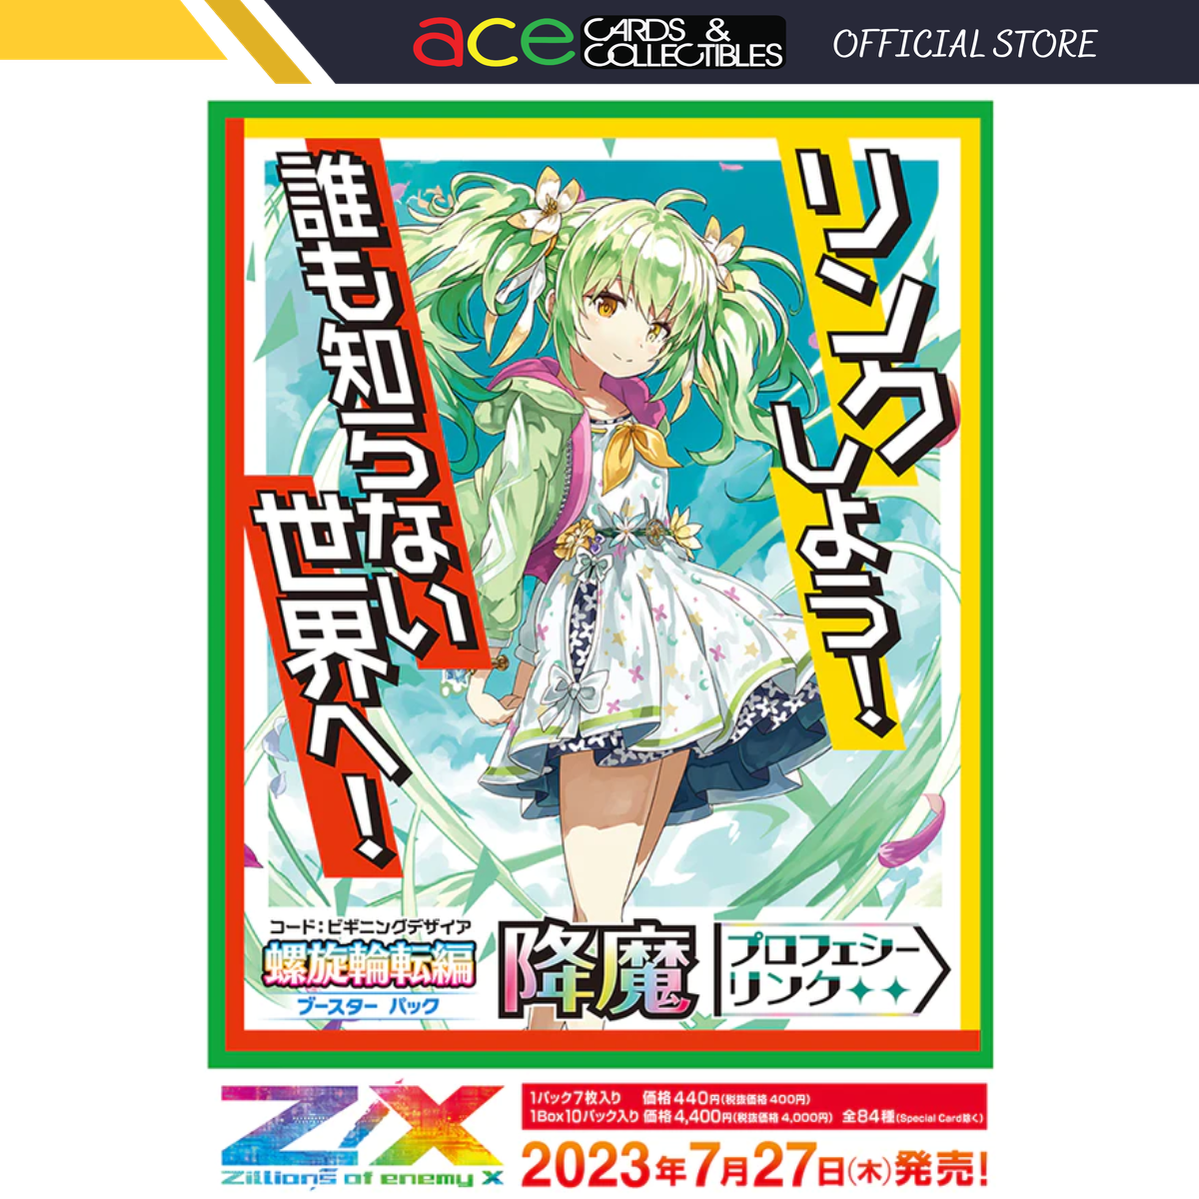 Z/X -Zillions of enemy X- Beginning Desire "Exorcism" Prophecy Link [ZX-B-45] (Japanese)-EX Pack (Random)-Broccoli-Ace Cards & Collectibles